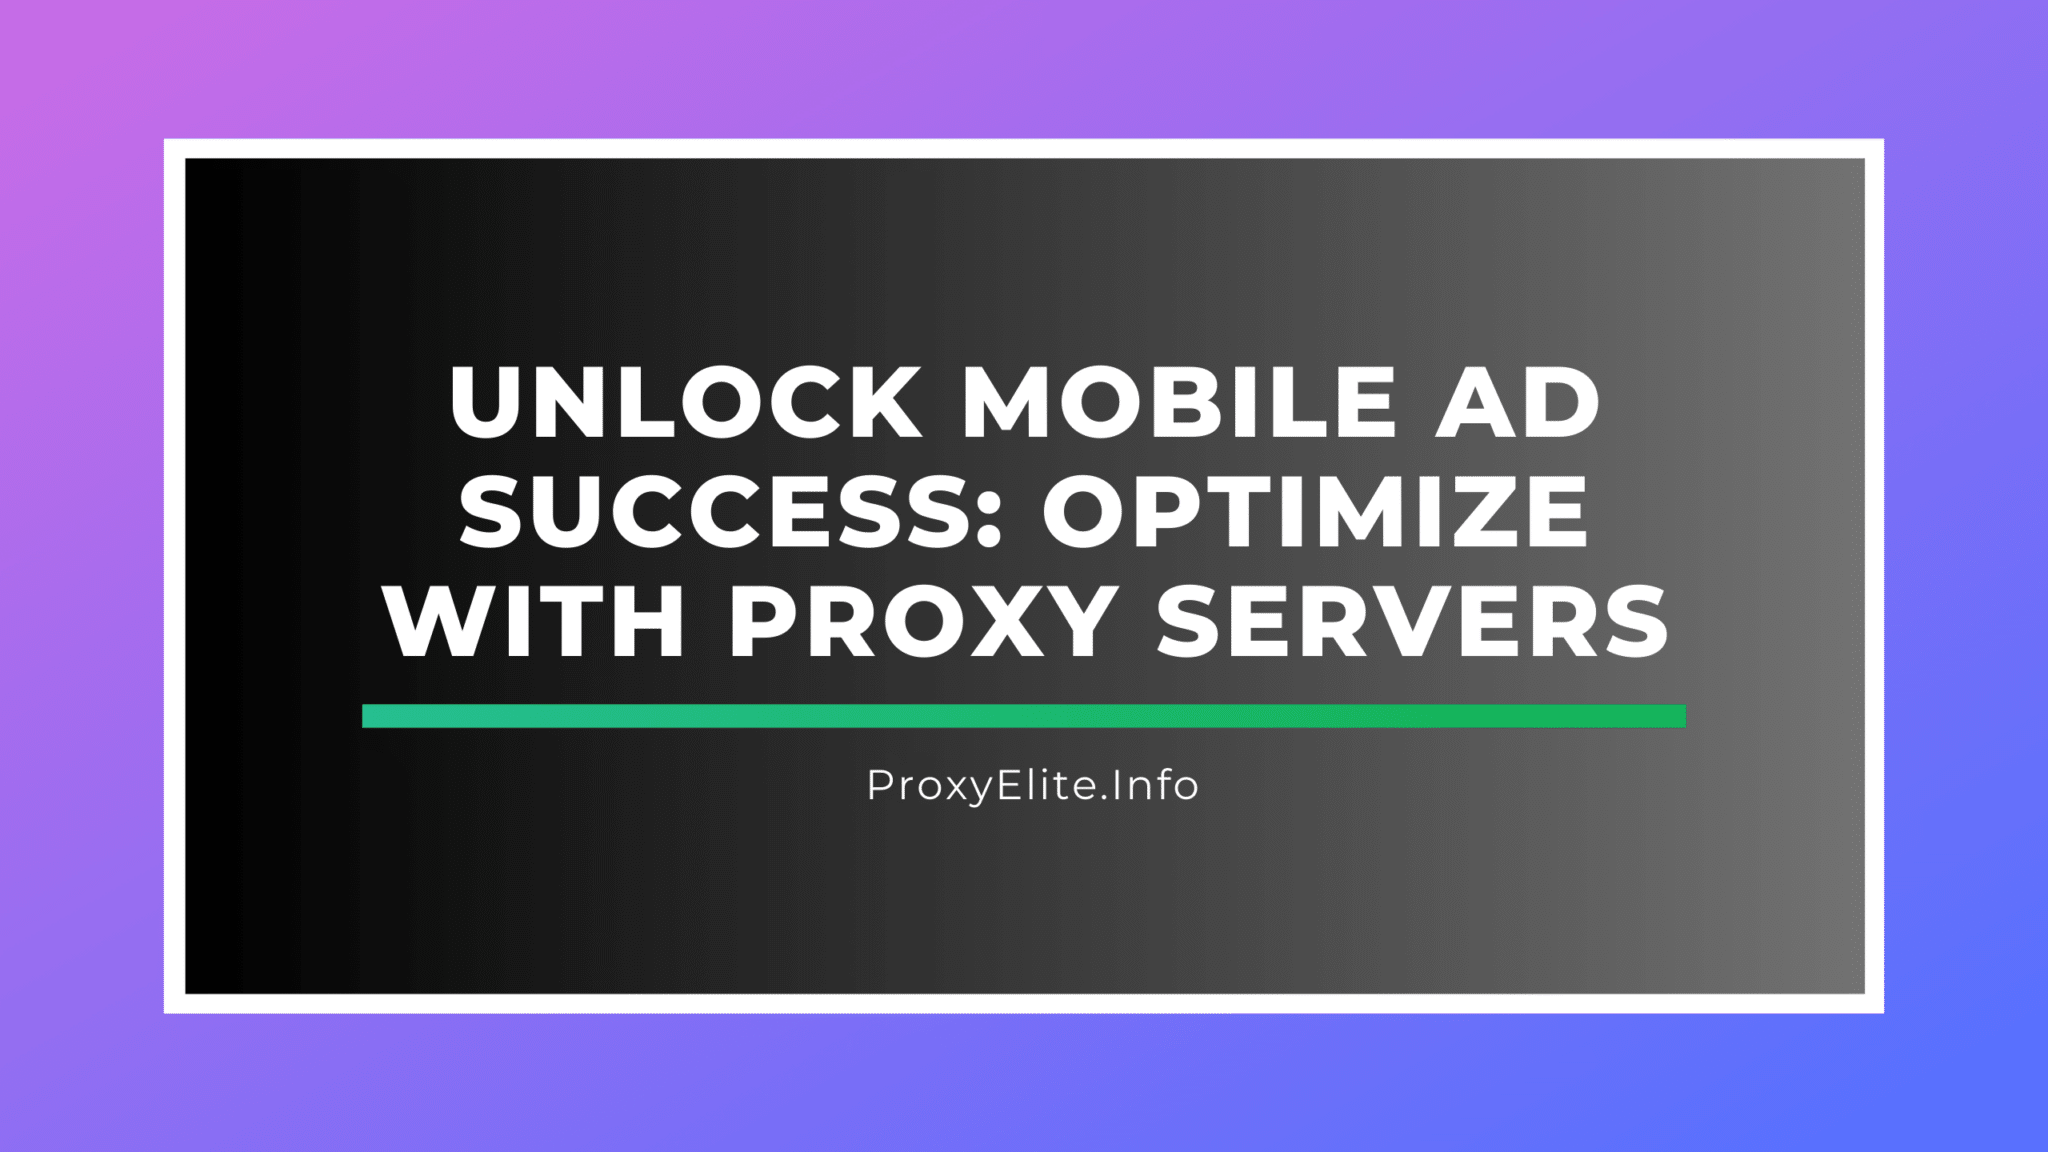 Unlock Mobile Ad Success: Optimize with Proxy Servers